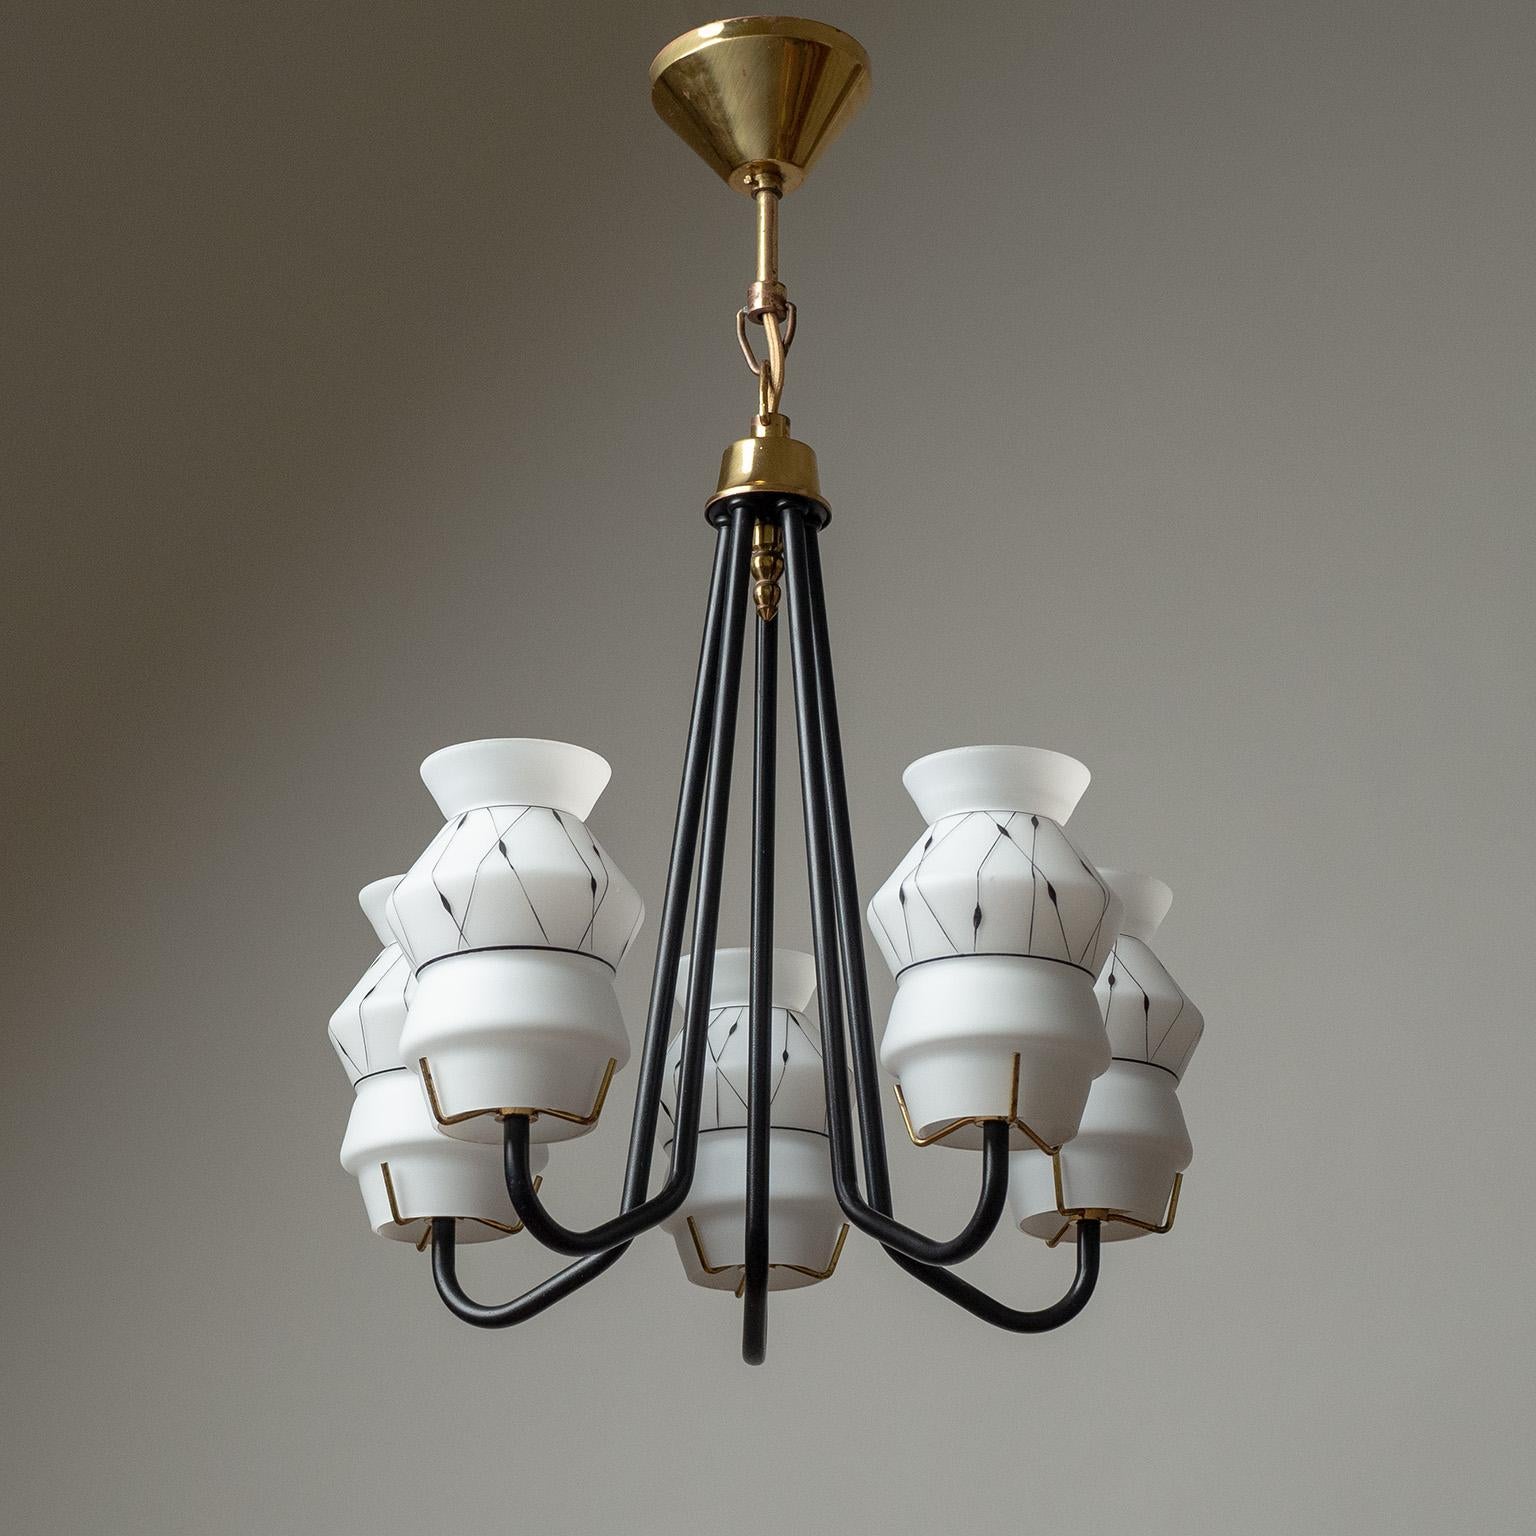 Charming Swedish ceiling light from the 1950s in classic colors of black, gold and white. Five black lacquered arms, each with an enameled glass diffuser held by brass details. Very nice original condition with minimal patina. Five original E27